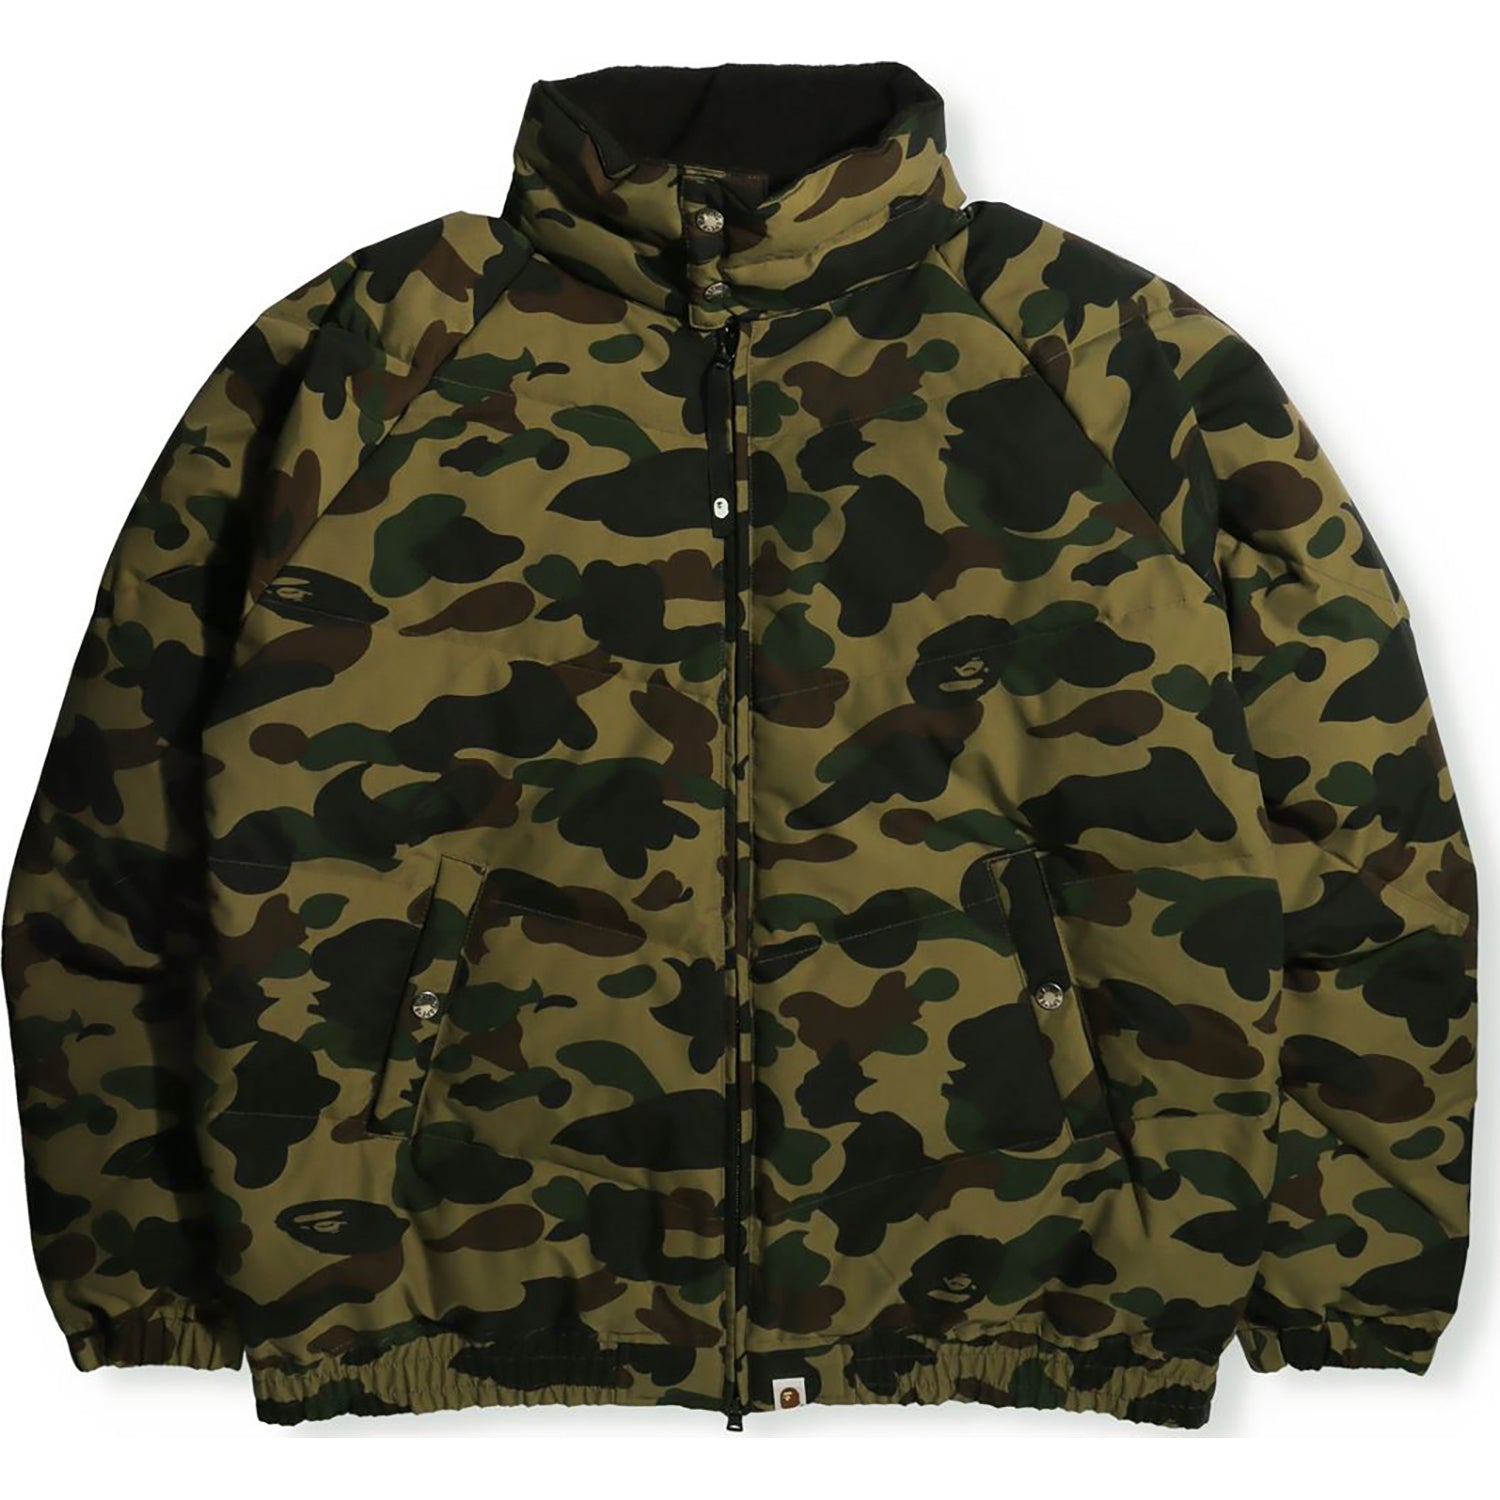 1ST CAMO LOOSE FIT DOWN JACKET MENS